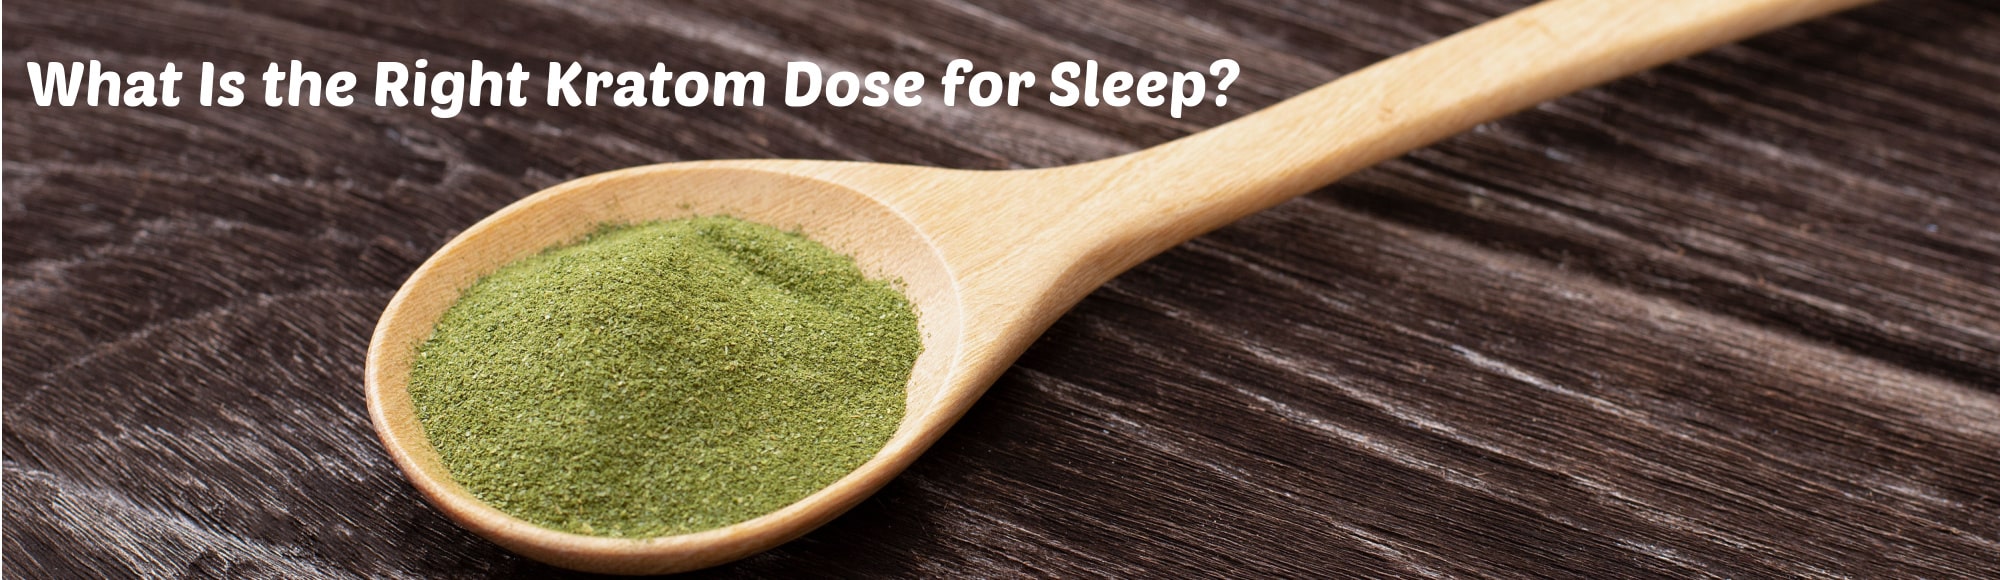 image of what is the right kratom dose for sleep